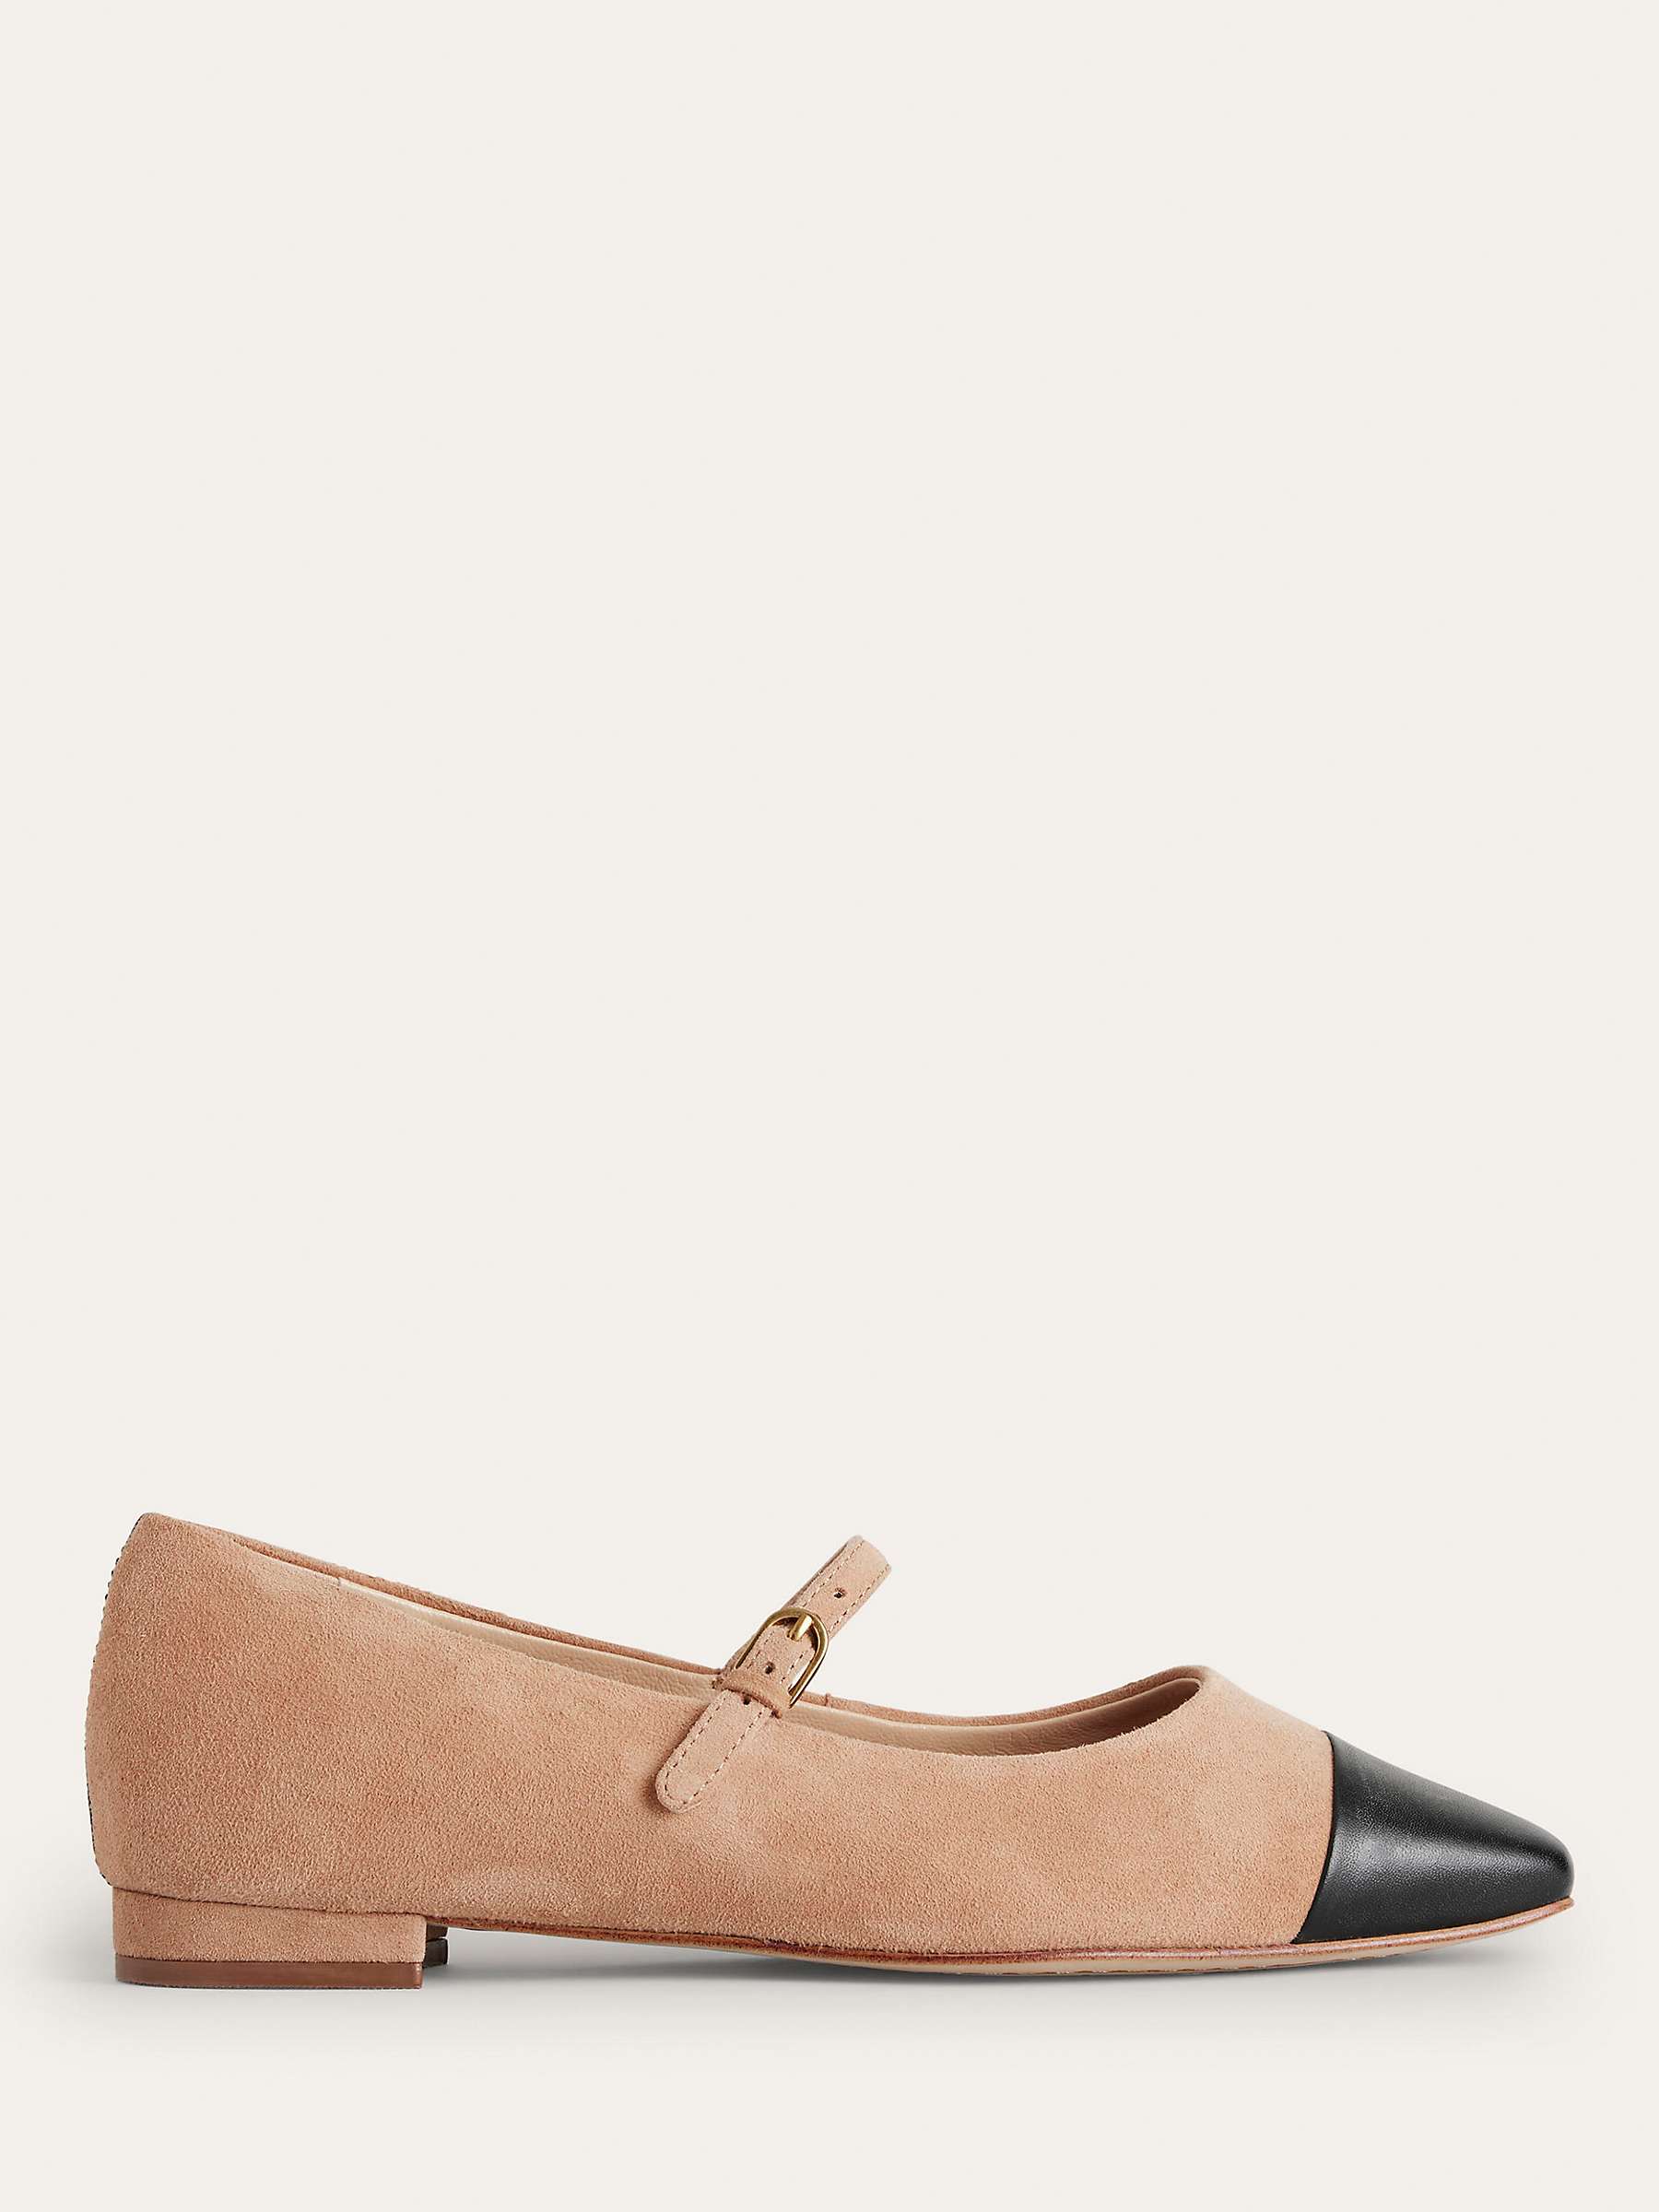 Buy Boden Mary Jane Suede Flats, Macchiato Online at johnlewis.com